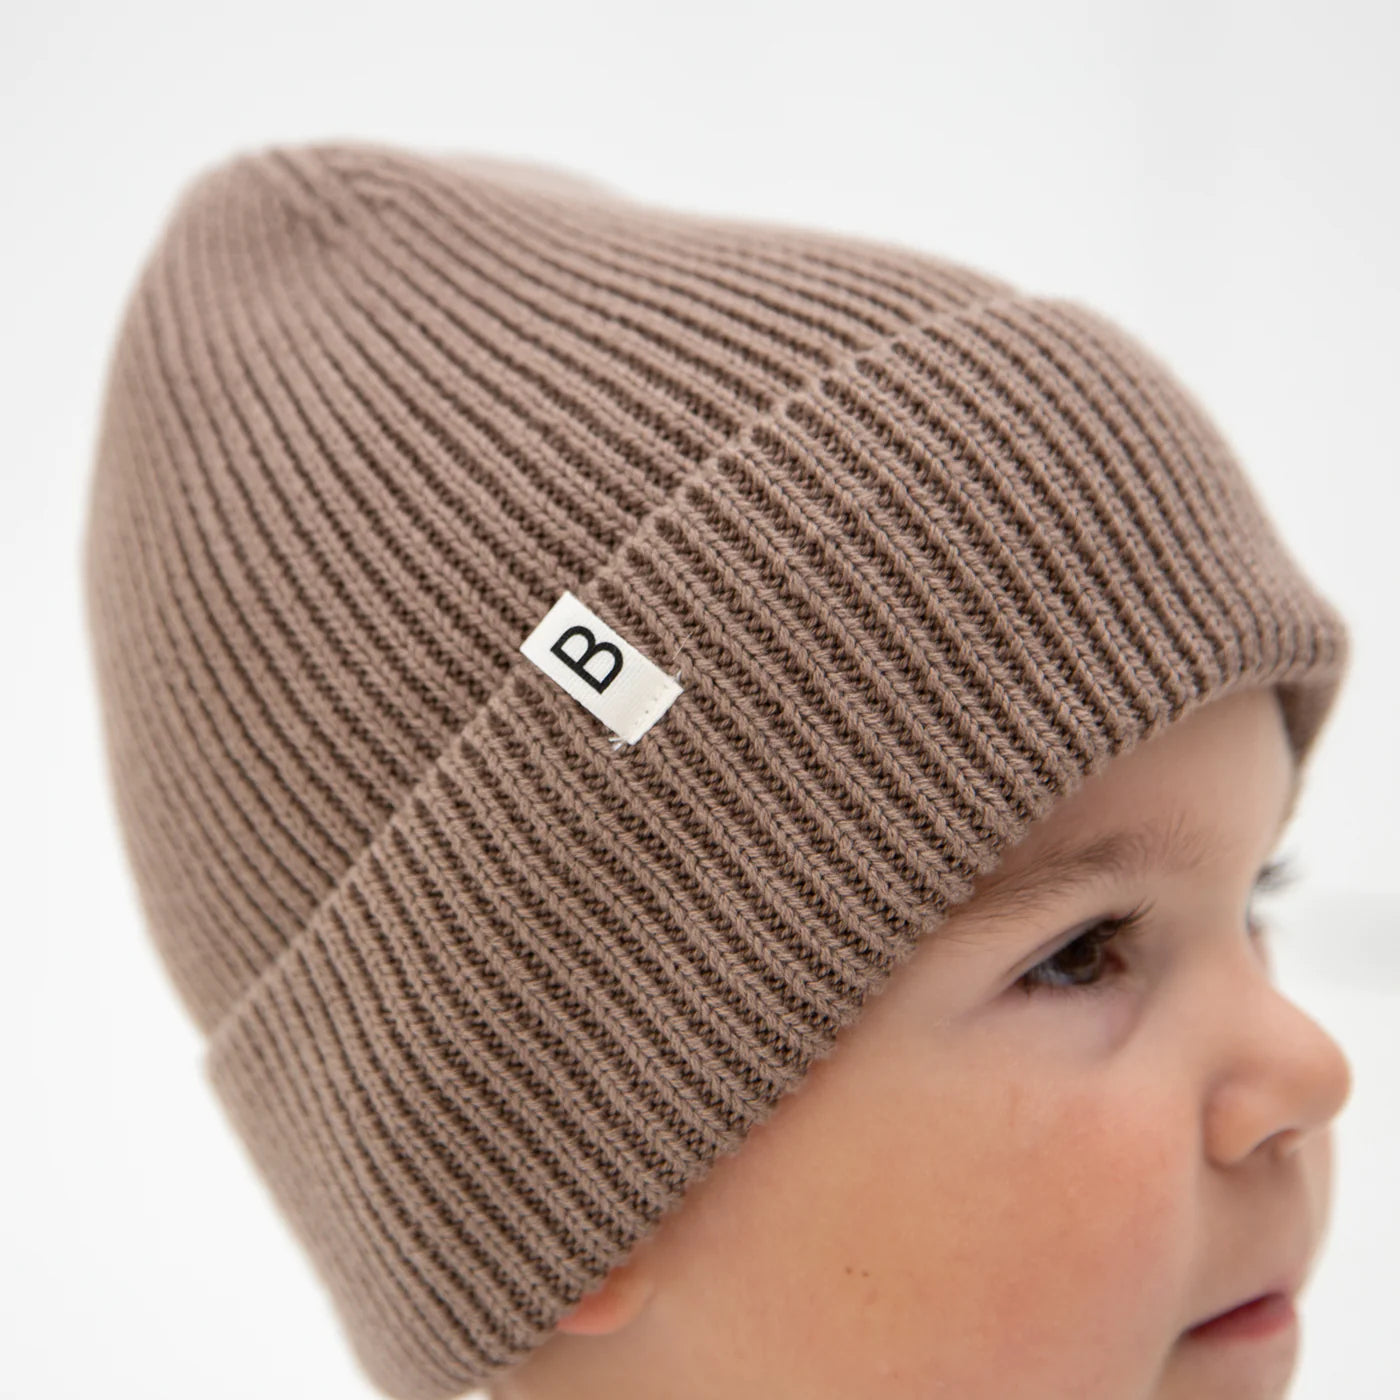 Baby hat and <tc>kids</tc> in Knit - Cappuccino